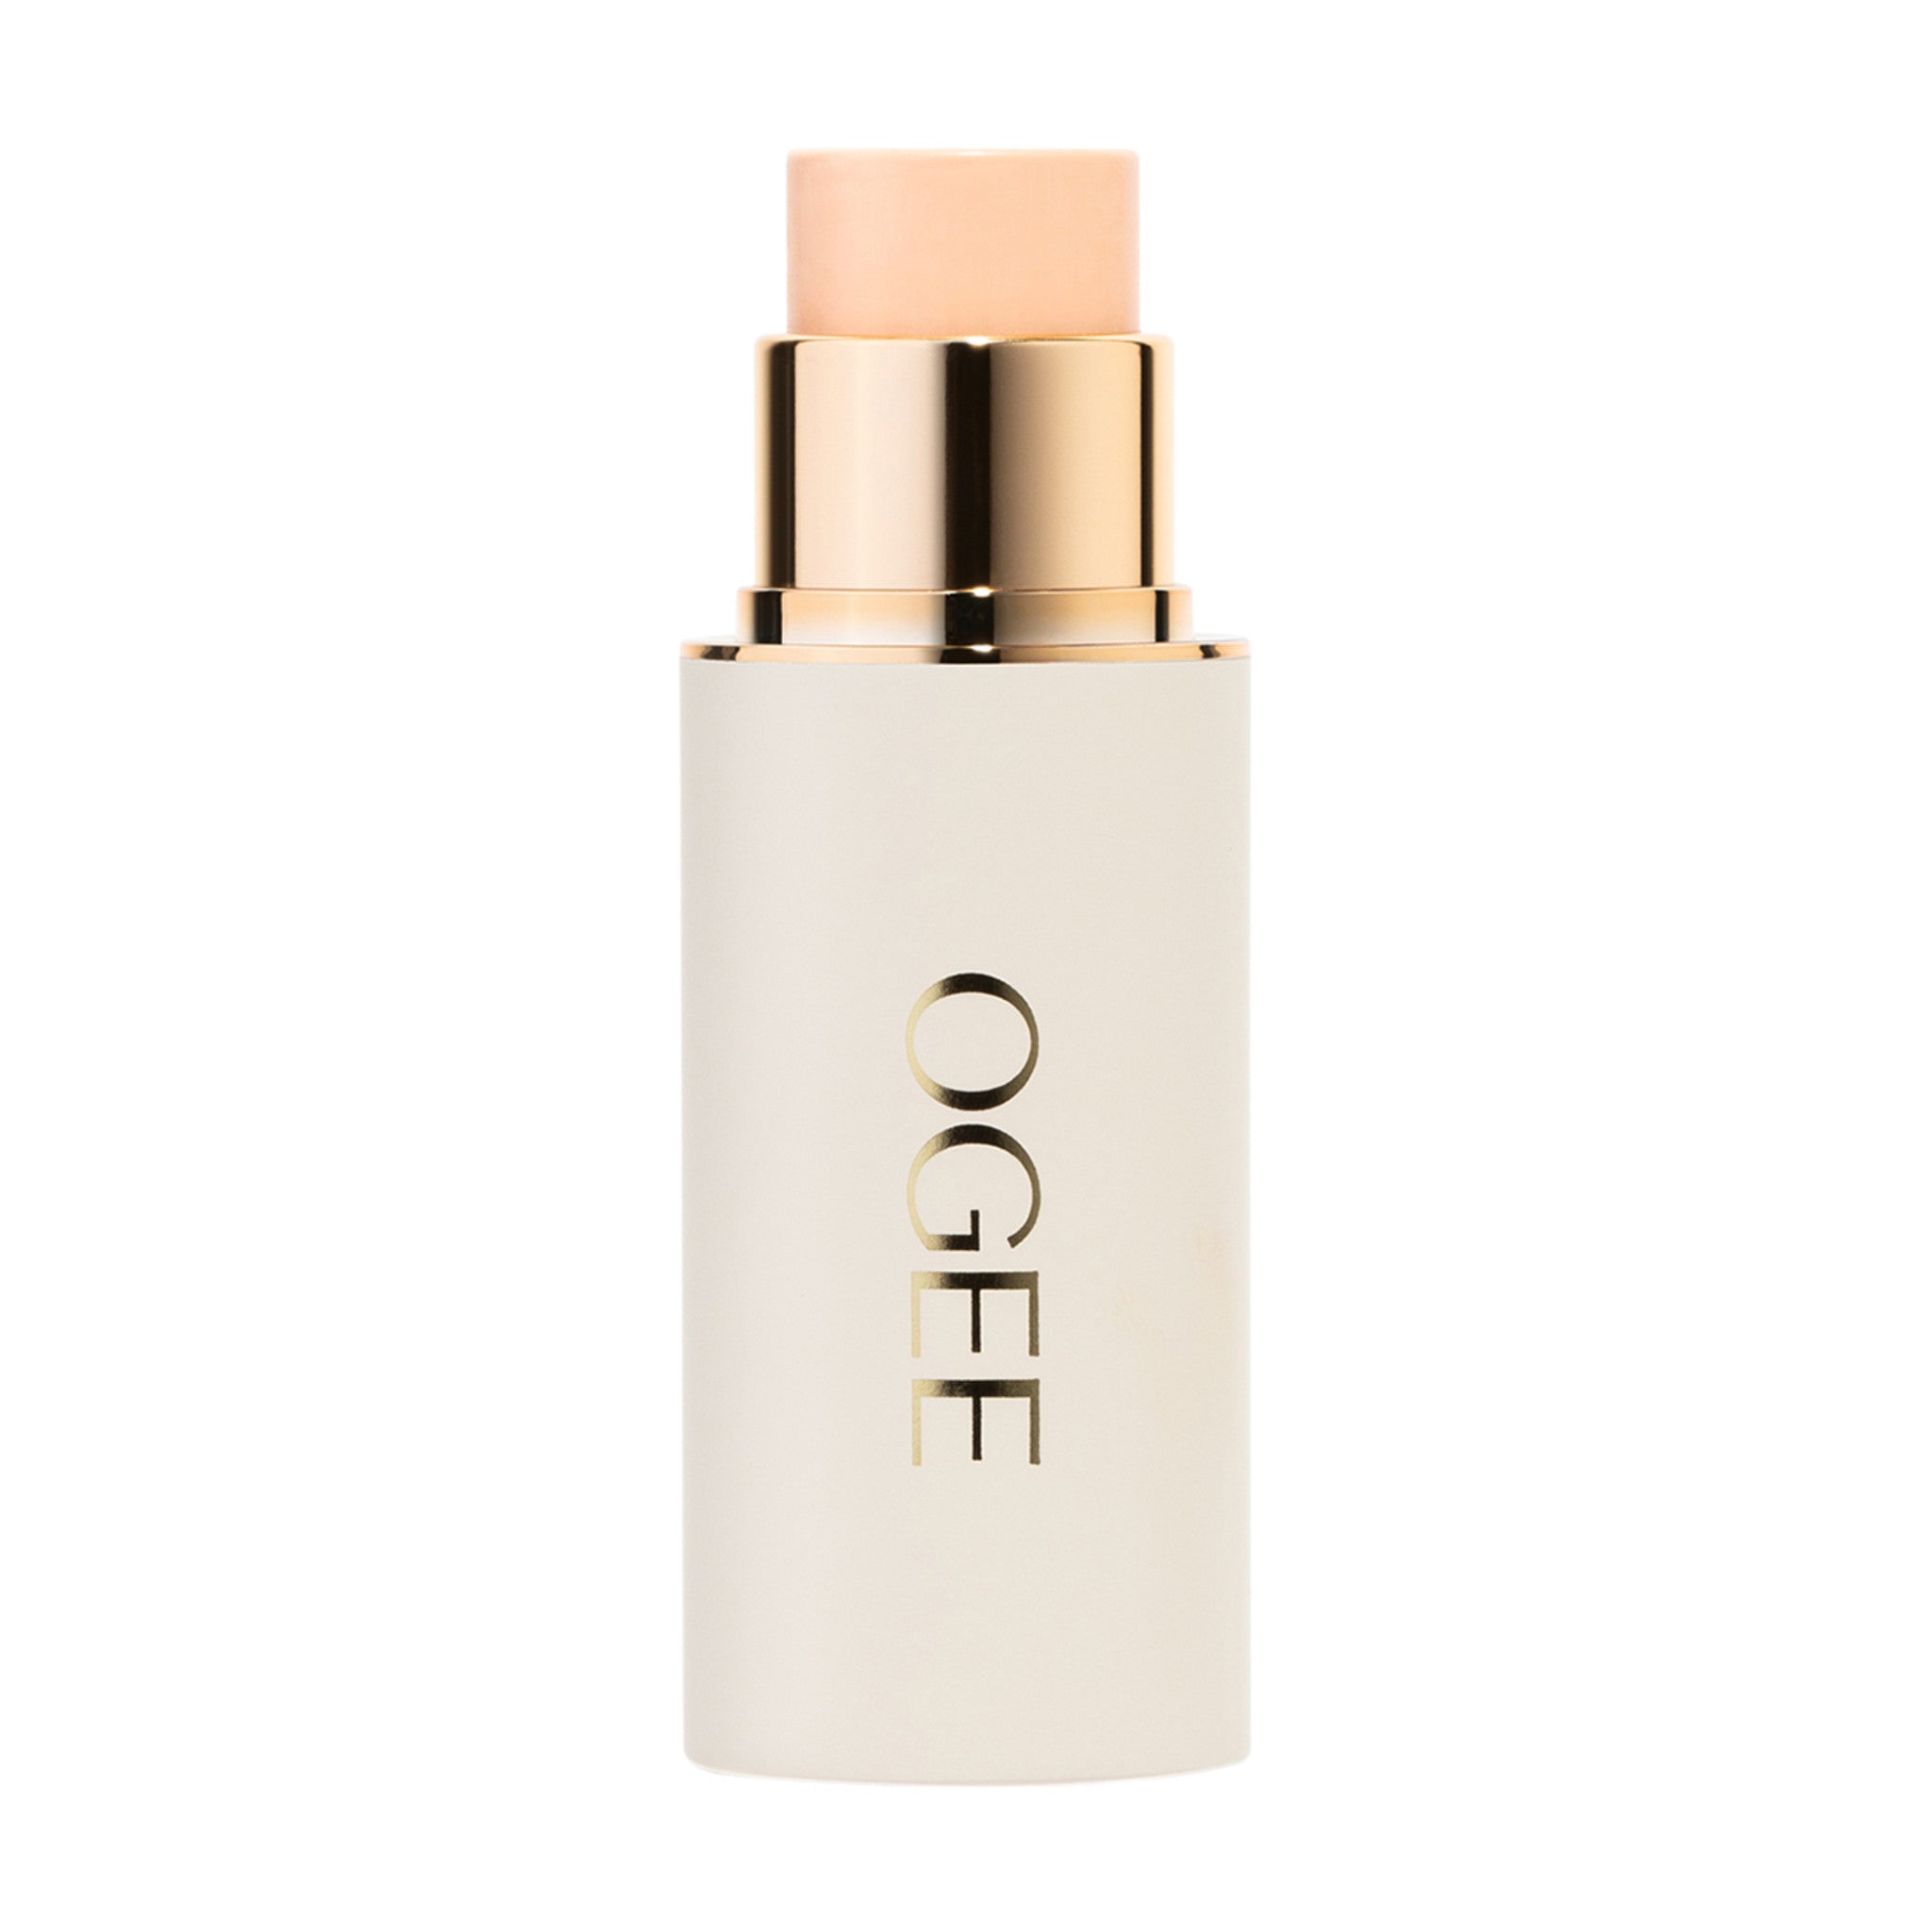 Ogee Sculpted Complexion Stick Color/Shade variant: Poplar 0.01C main image. This product is for light cool complexions